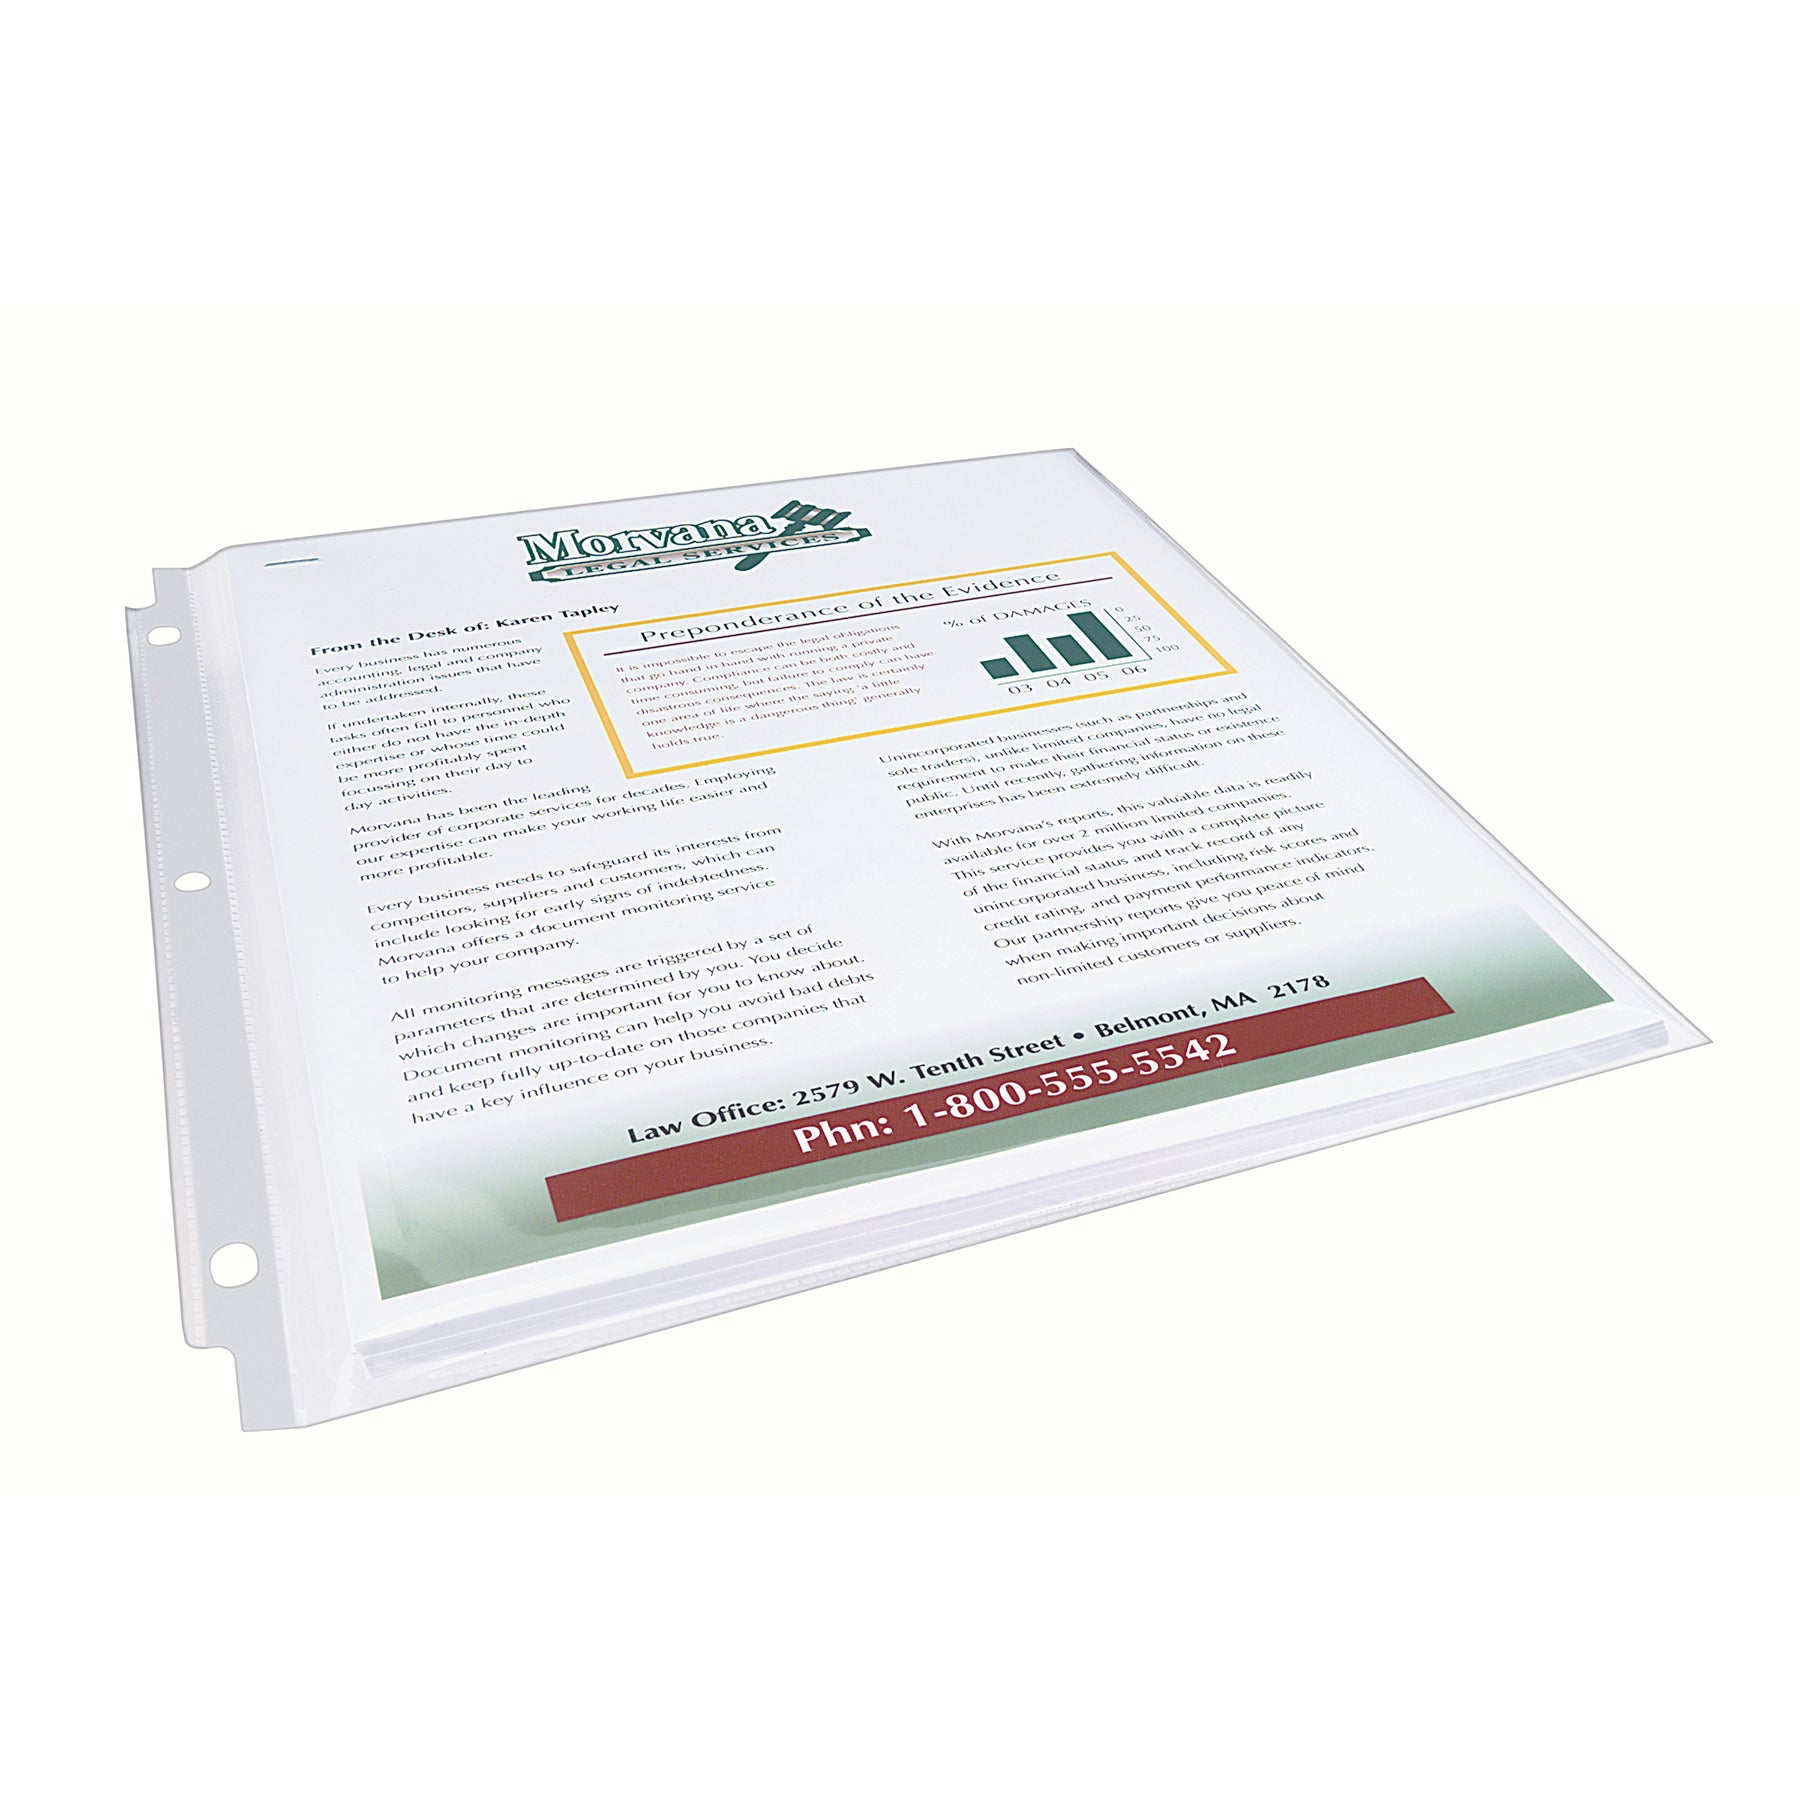 Clear Heavyweight Multi-Page Capacity Sheet Protectors, Holds 8-1/2" x 11" Sheets, Top Load, 25 Per Pack, 3 Packs